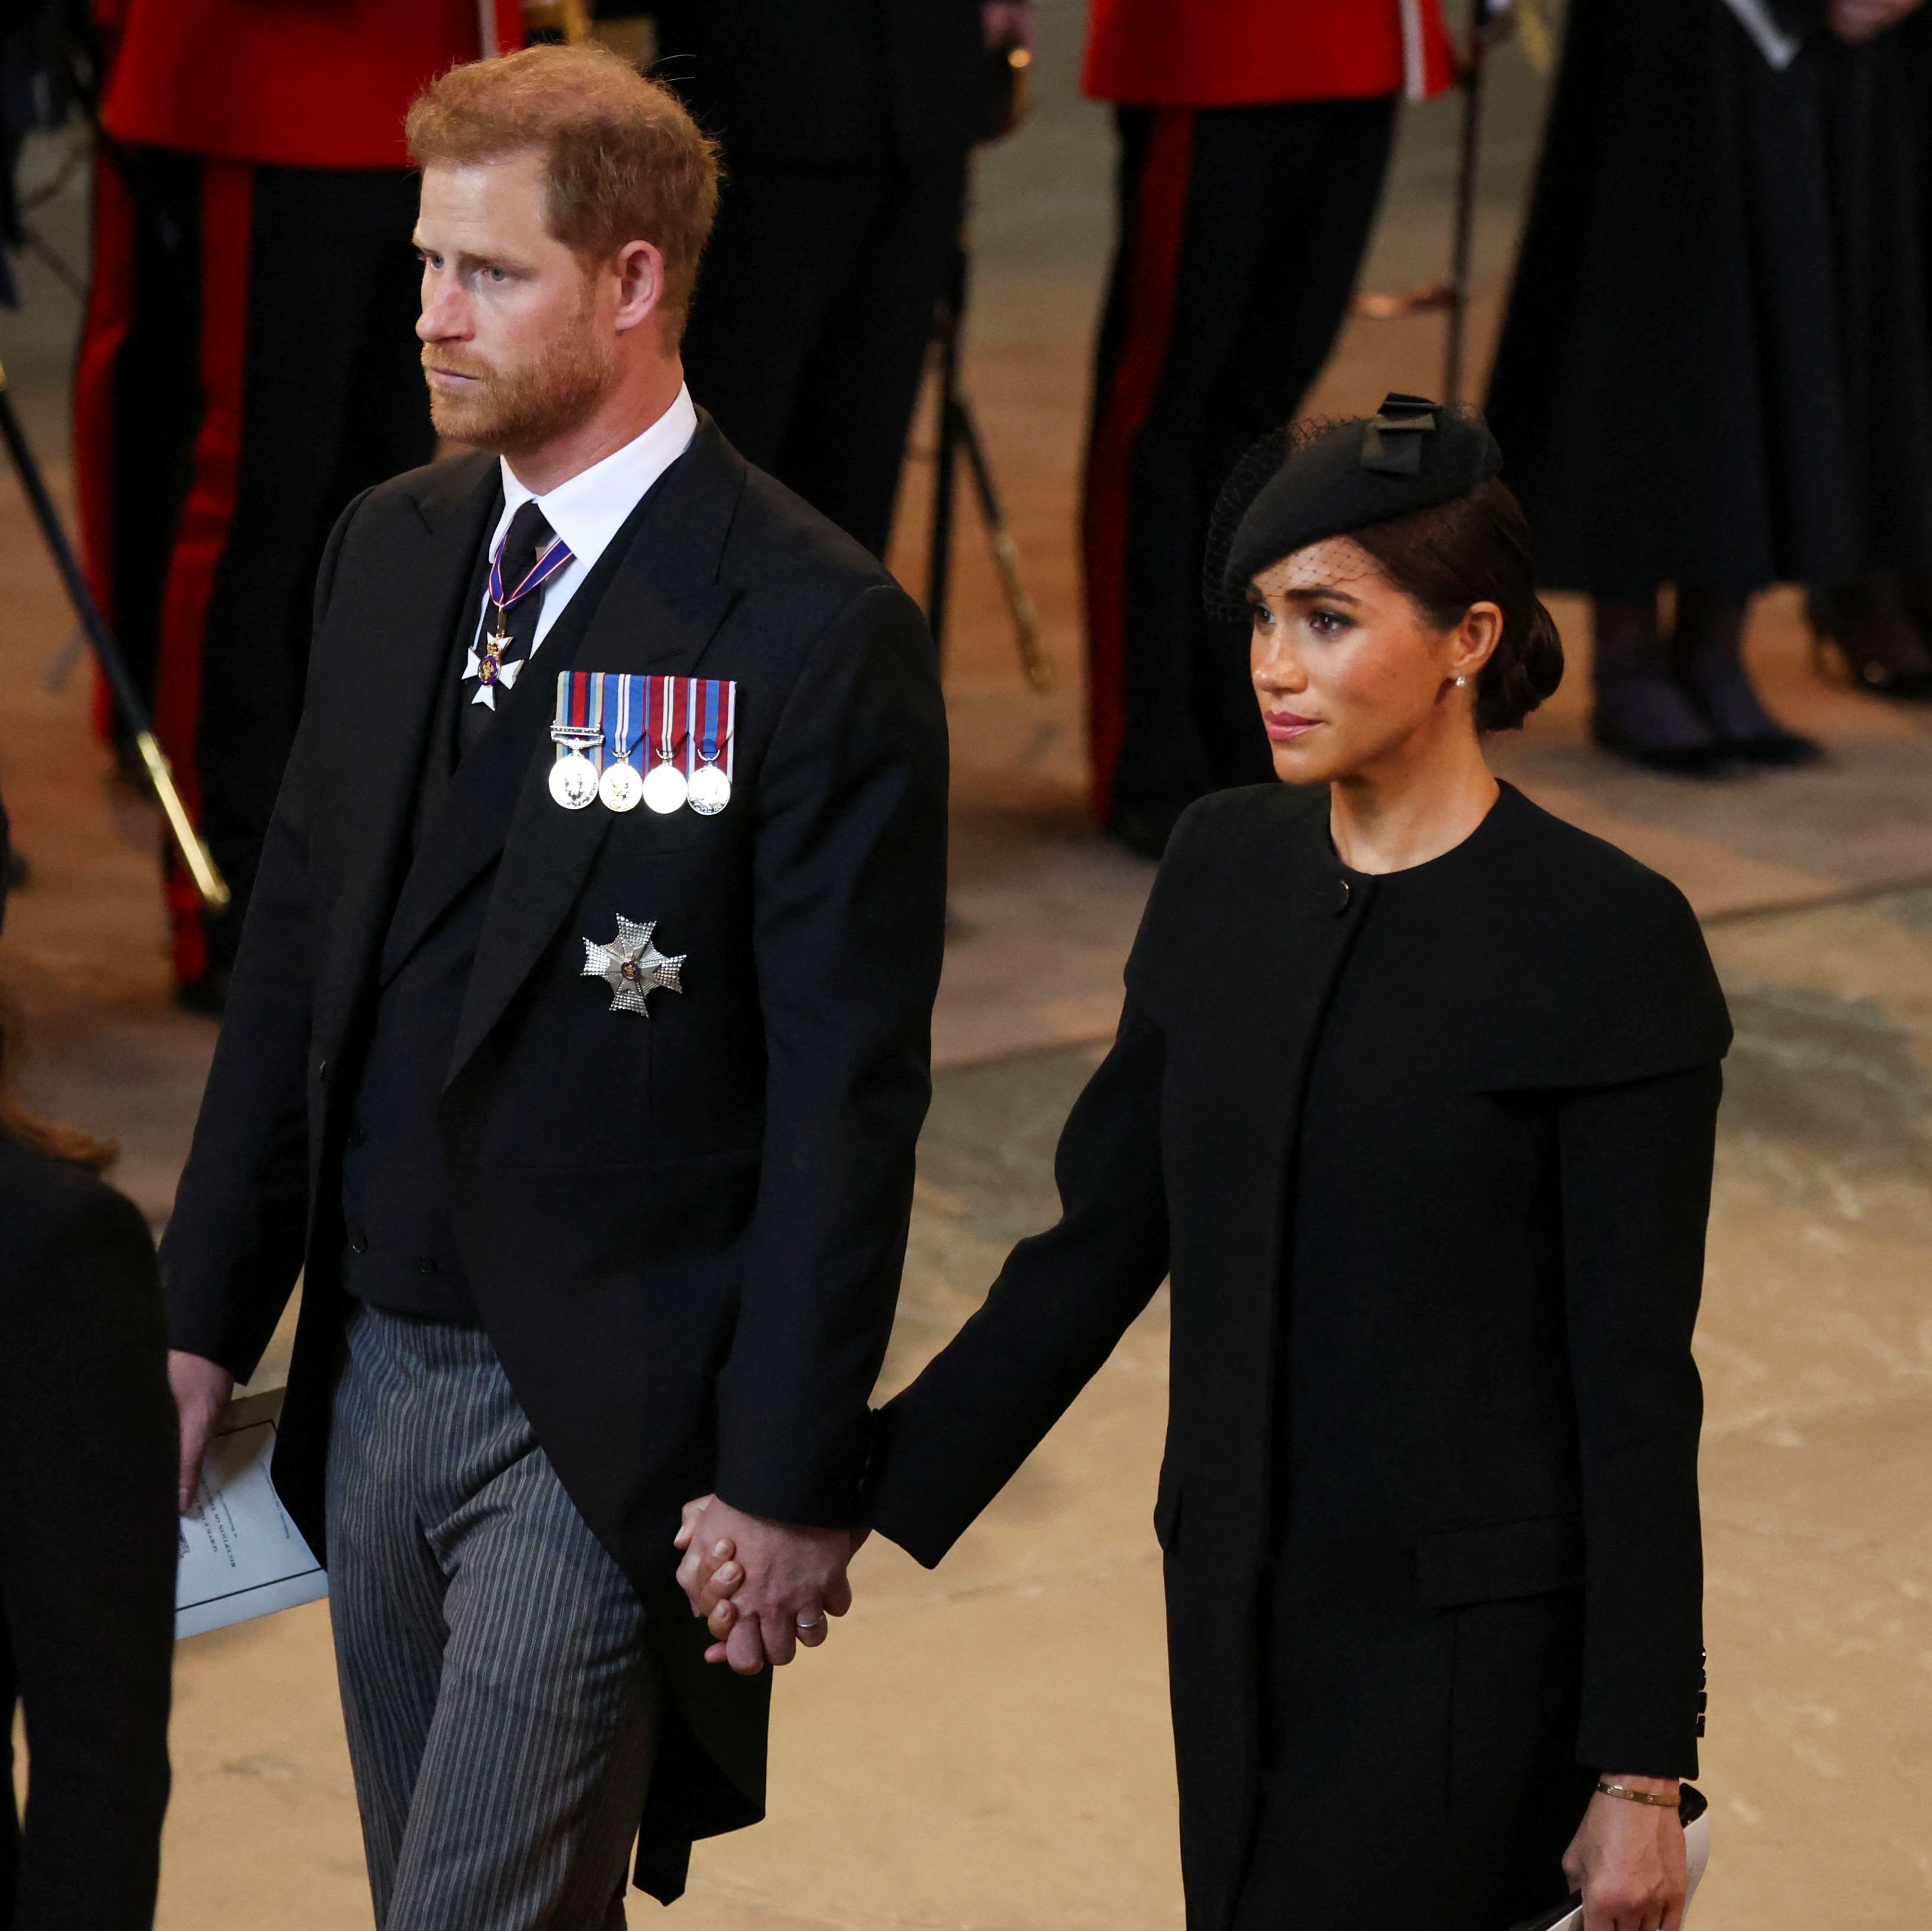 The couple's extended visit following the Queen's death has come to an end.